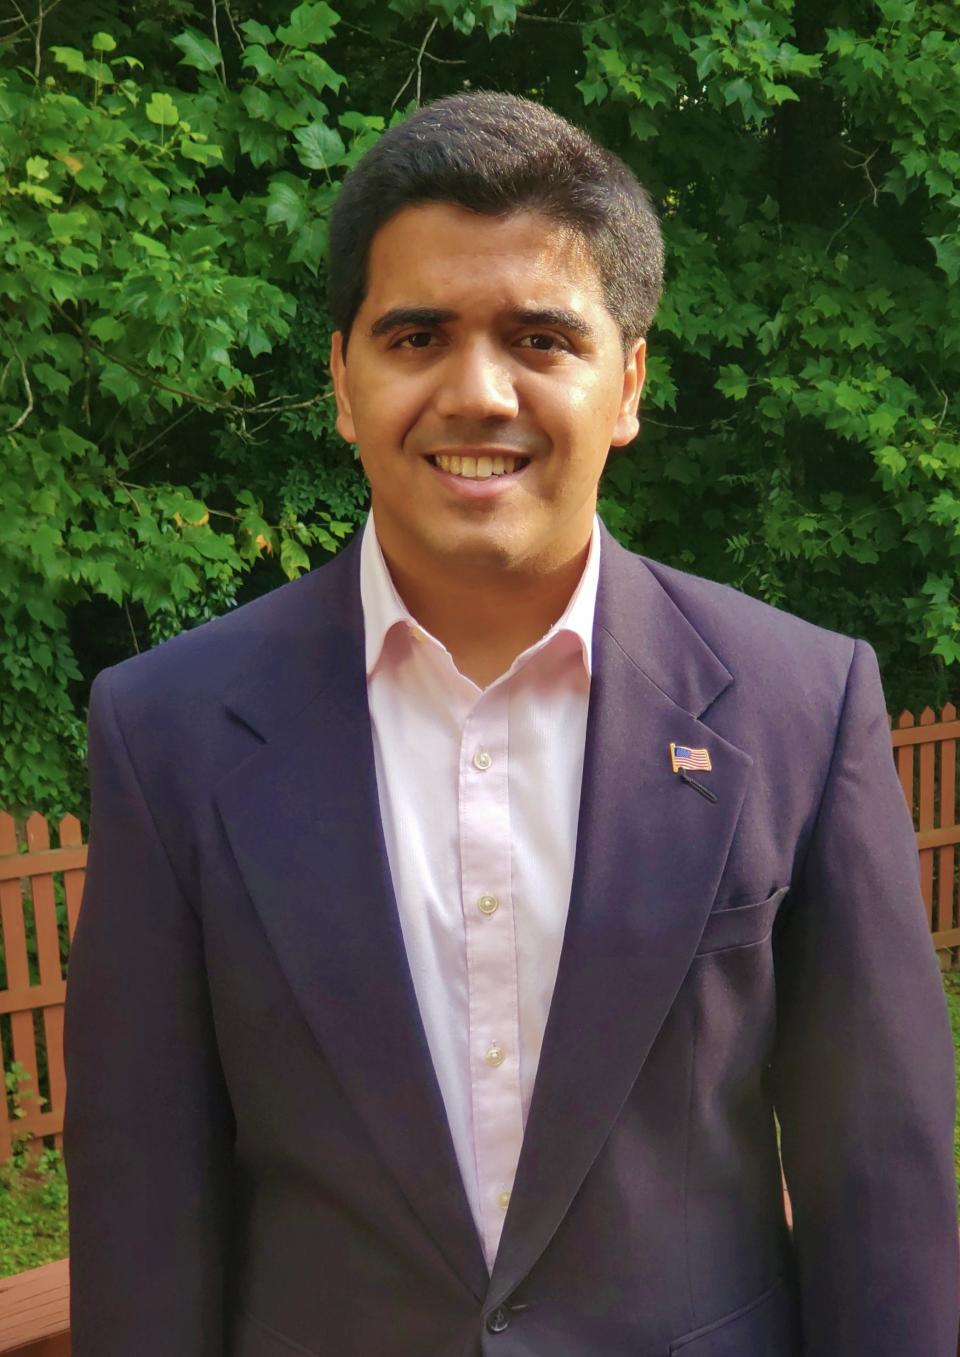 Om Sakhalkar is a medical student at the Medical College of Georgia. He is the President of the American Medical Association – MCG Chapter and a clinic coordinator at the Asian Clinic.